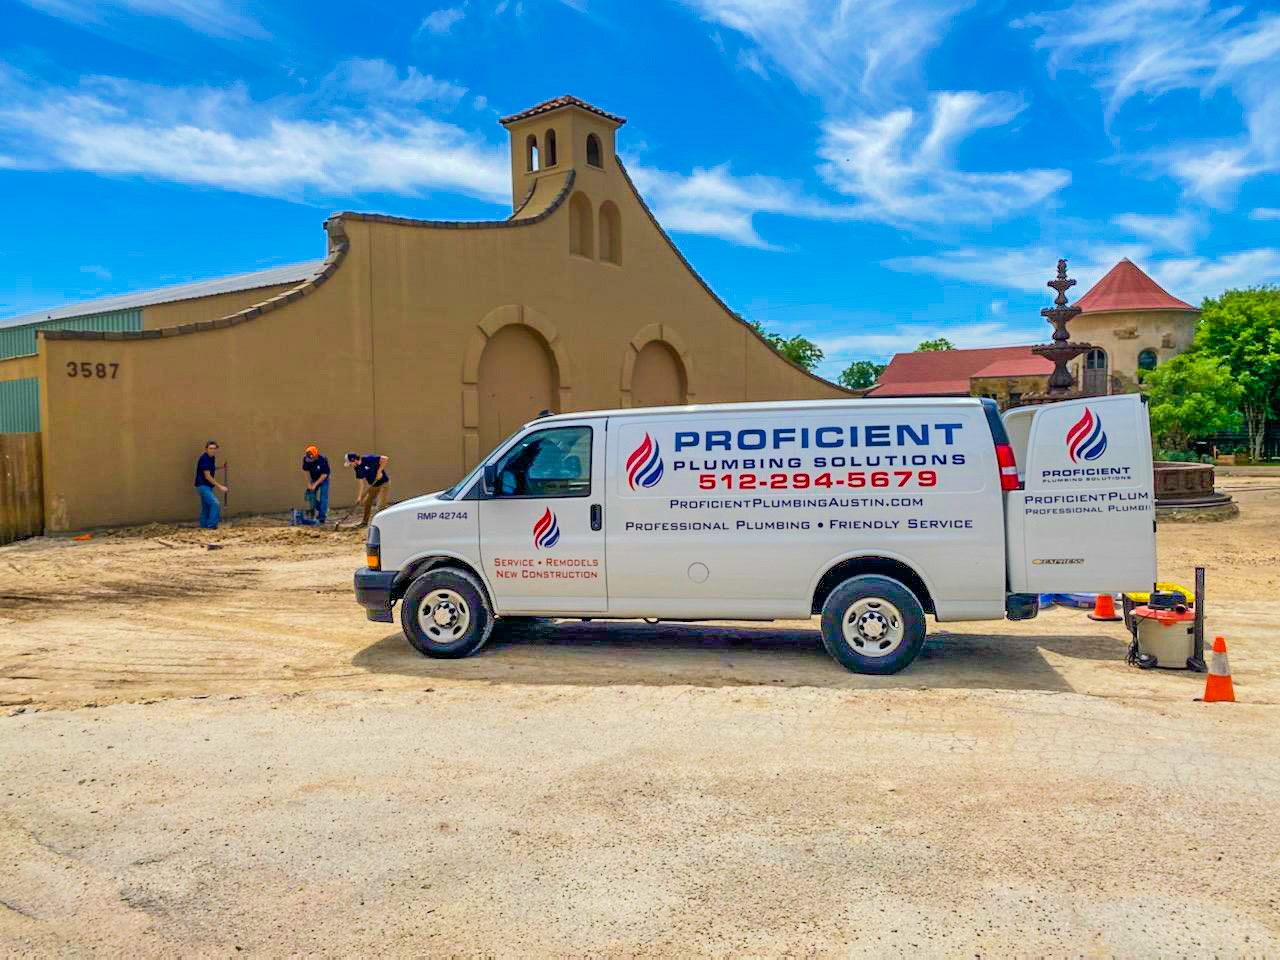 Affordable Plumber in Dripping Springs, TX - Proficient Plumbing Solutions